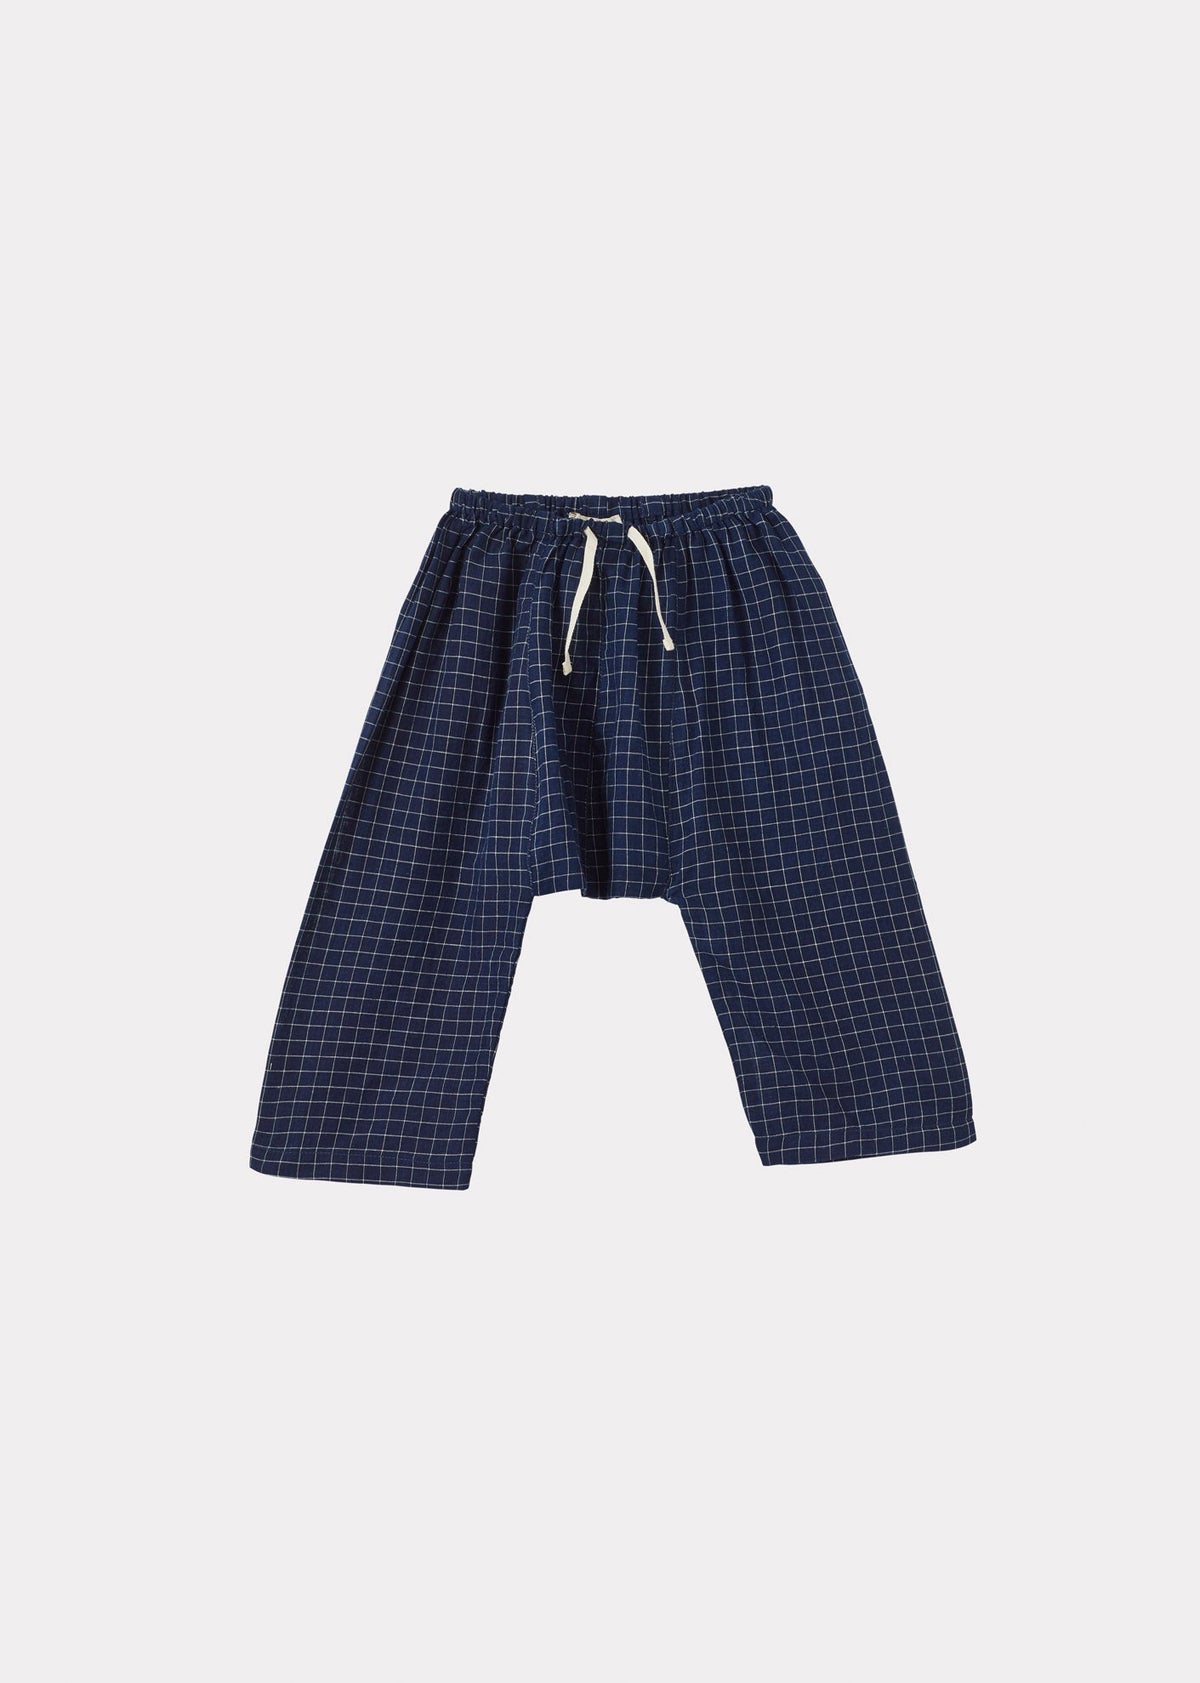 LINUM BABY TROUSERS - NAVY YARN DYED CHECK